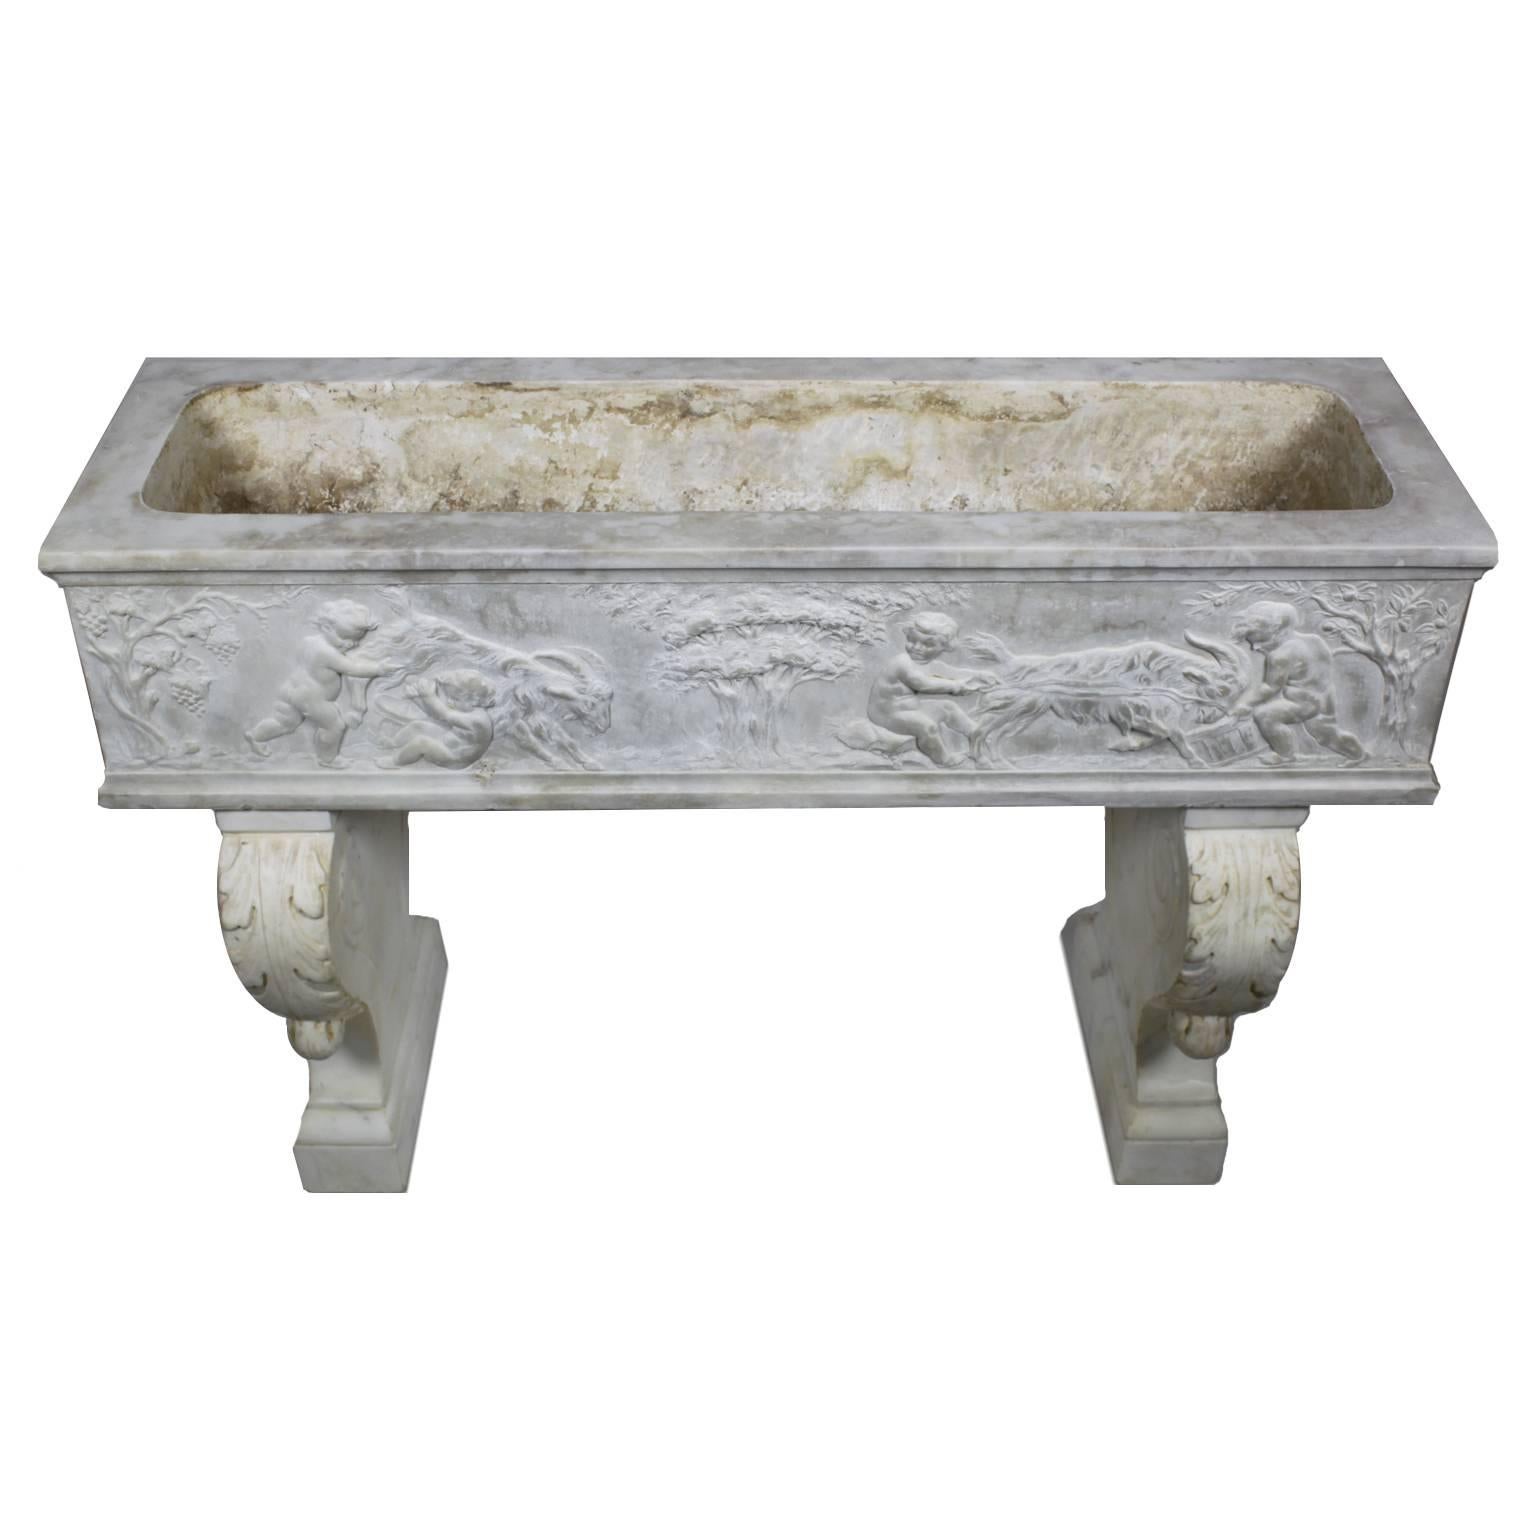 French 19th Century, Whimsical Rococo Style Marble Carved Planter with Children For Sale 1